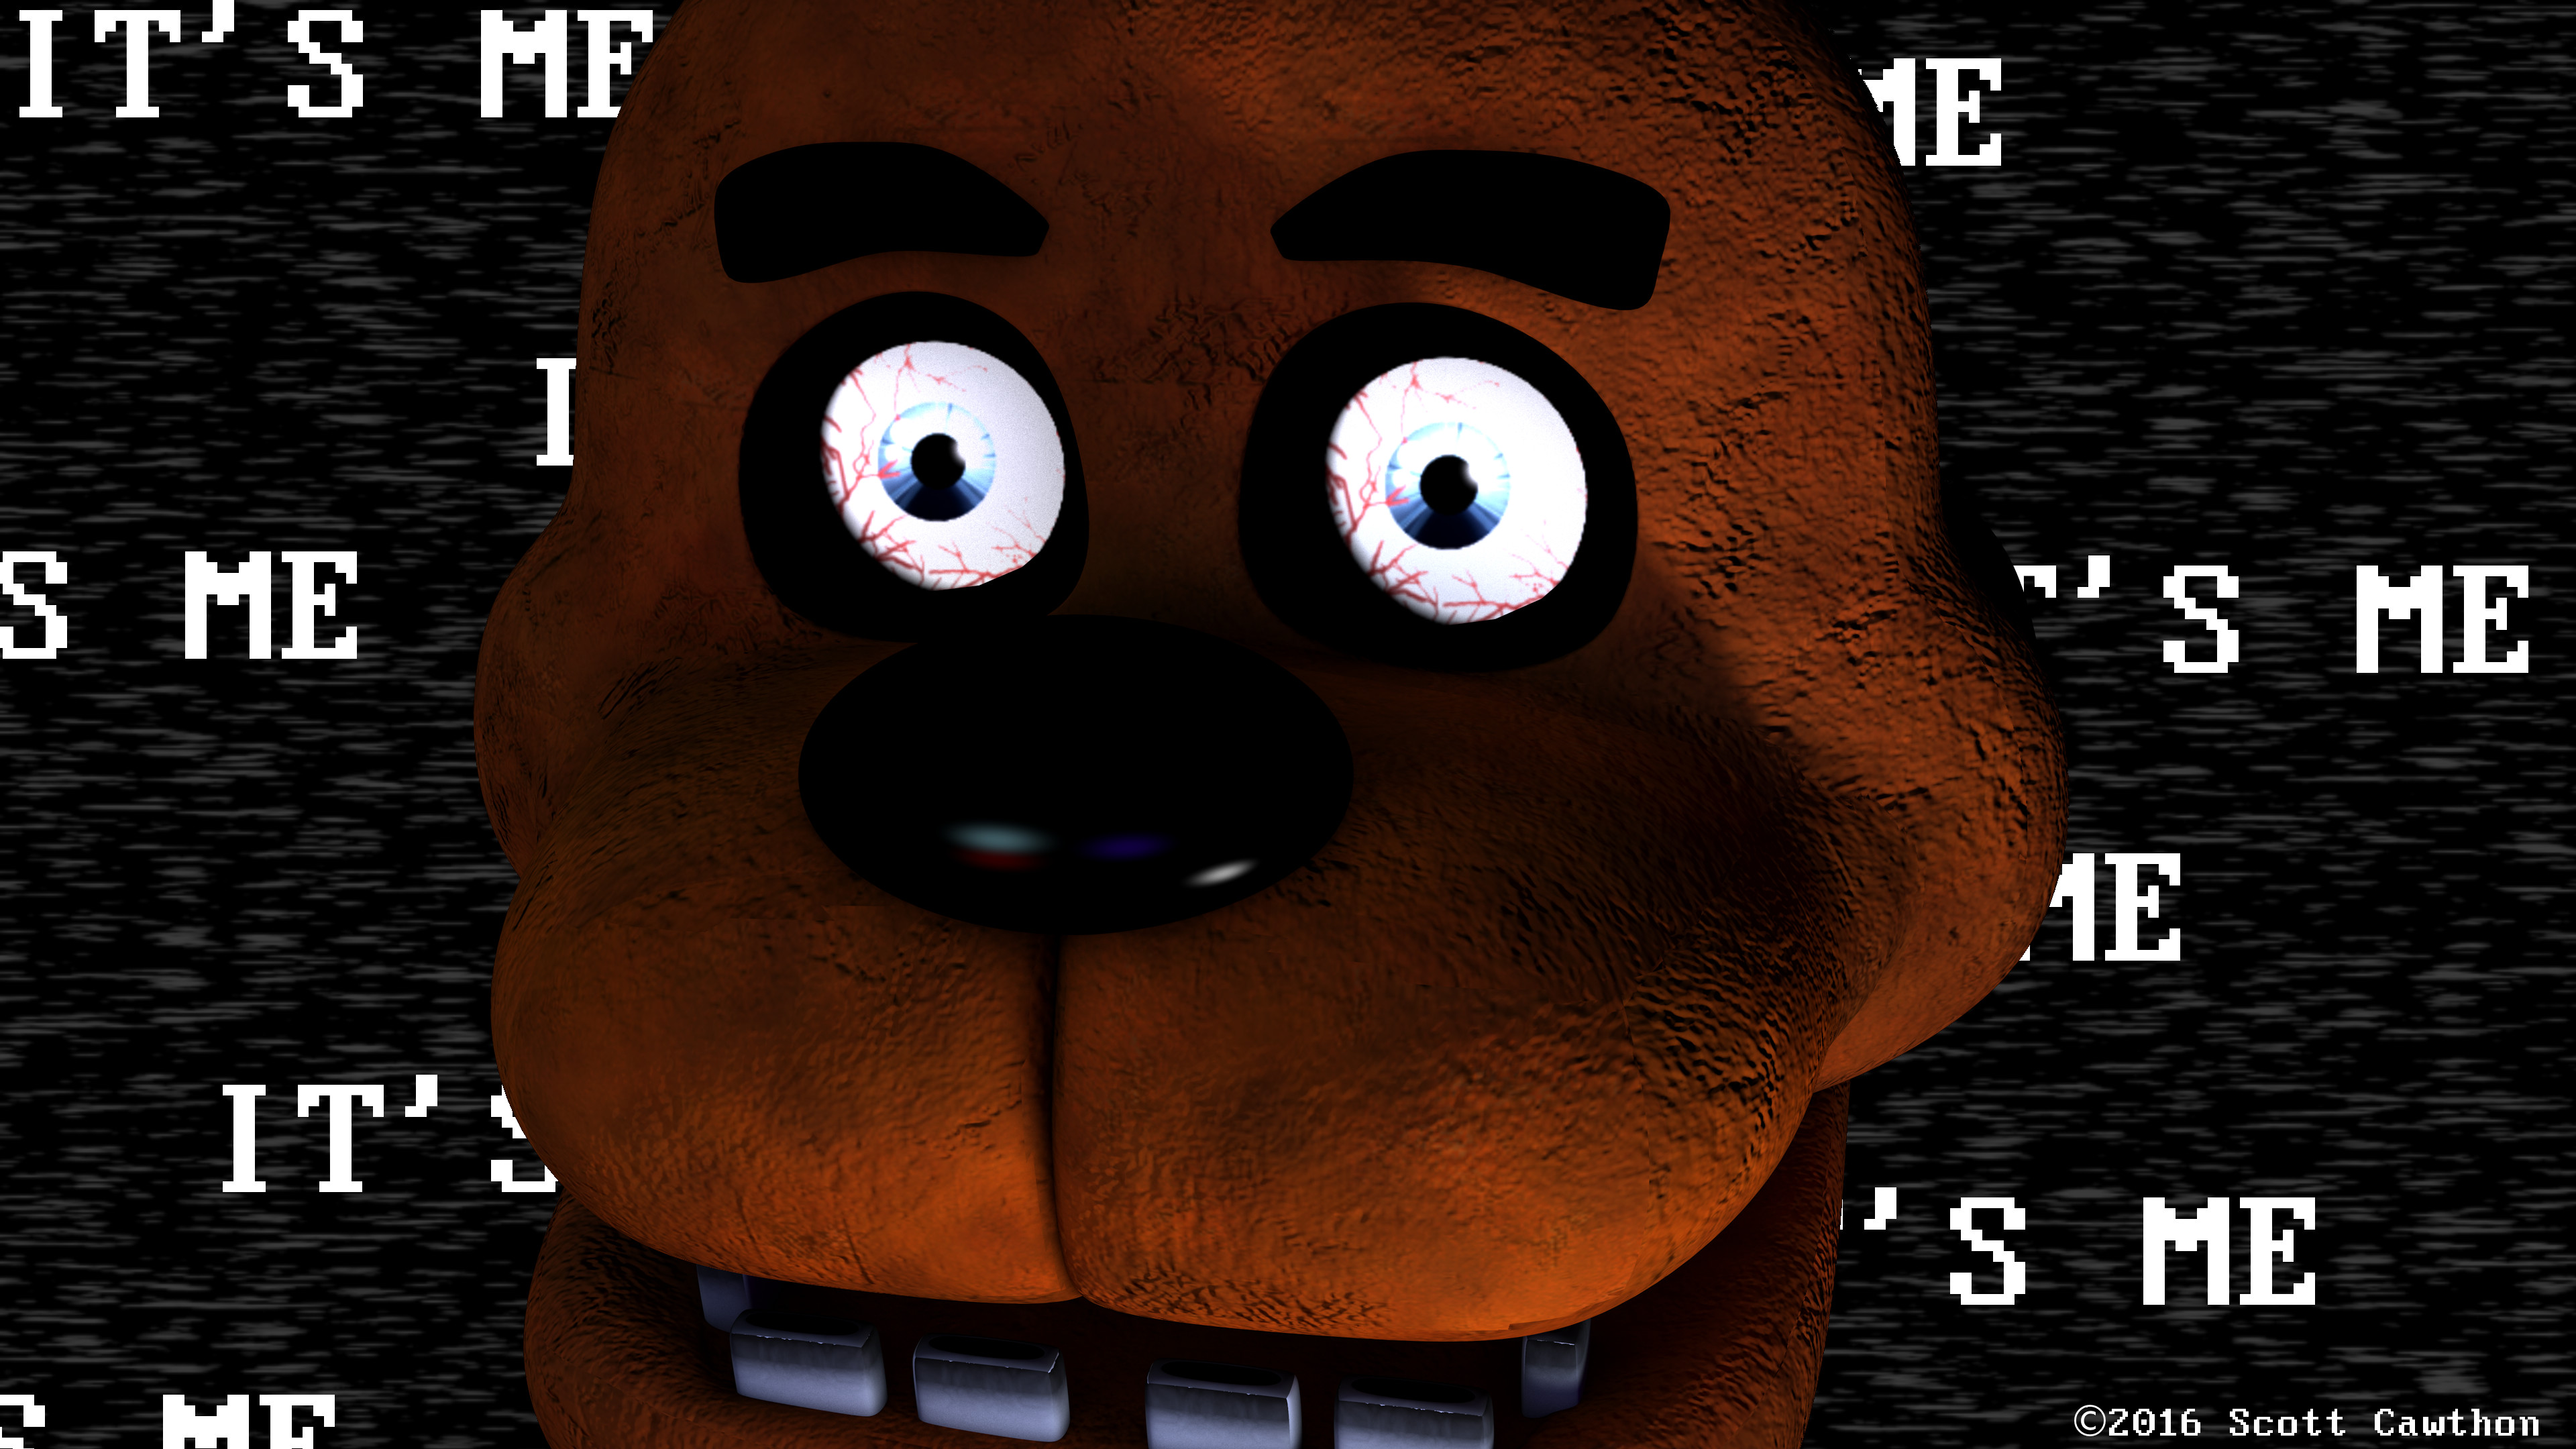 Five Nights At Freddys Wallpapers (80+ Images)